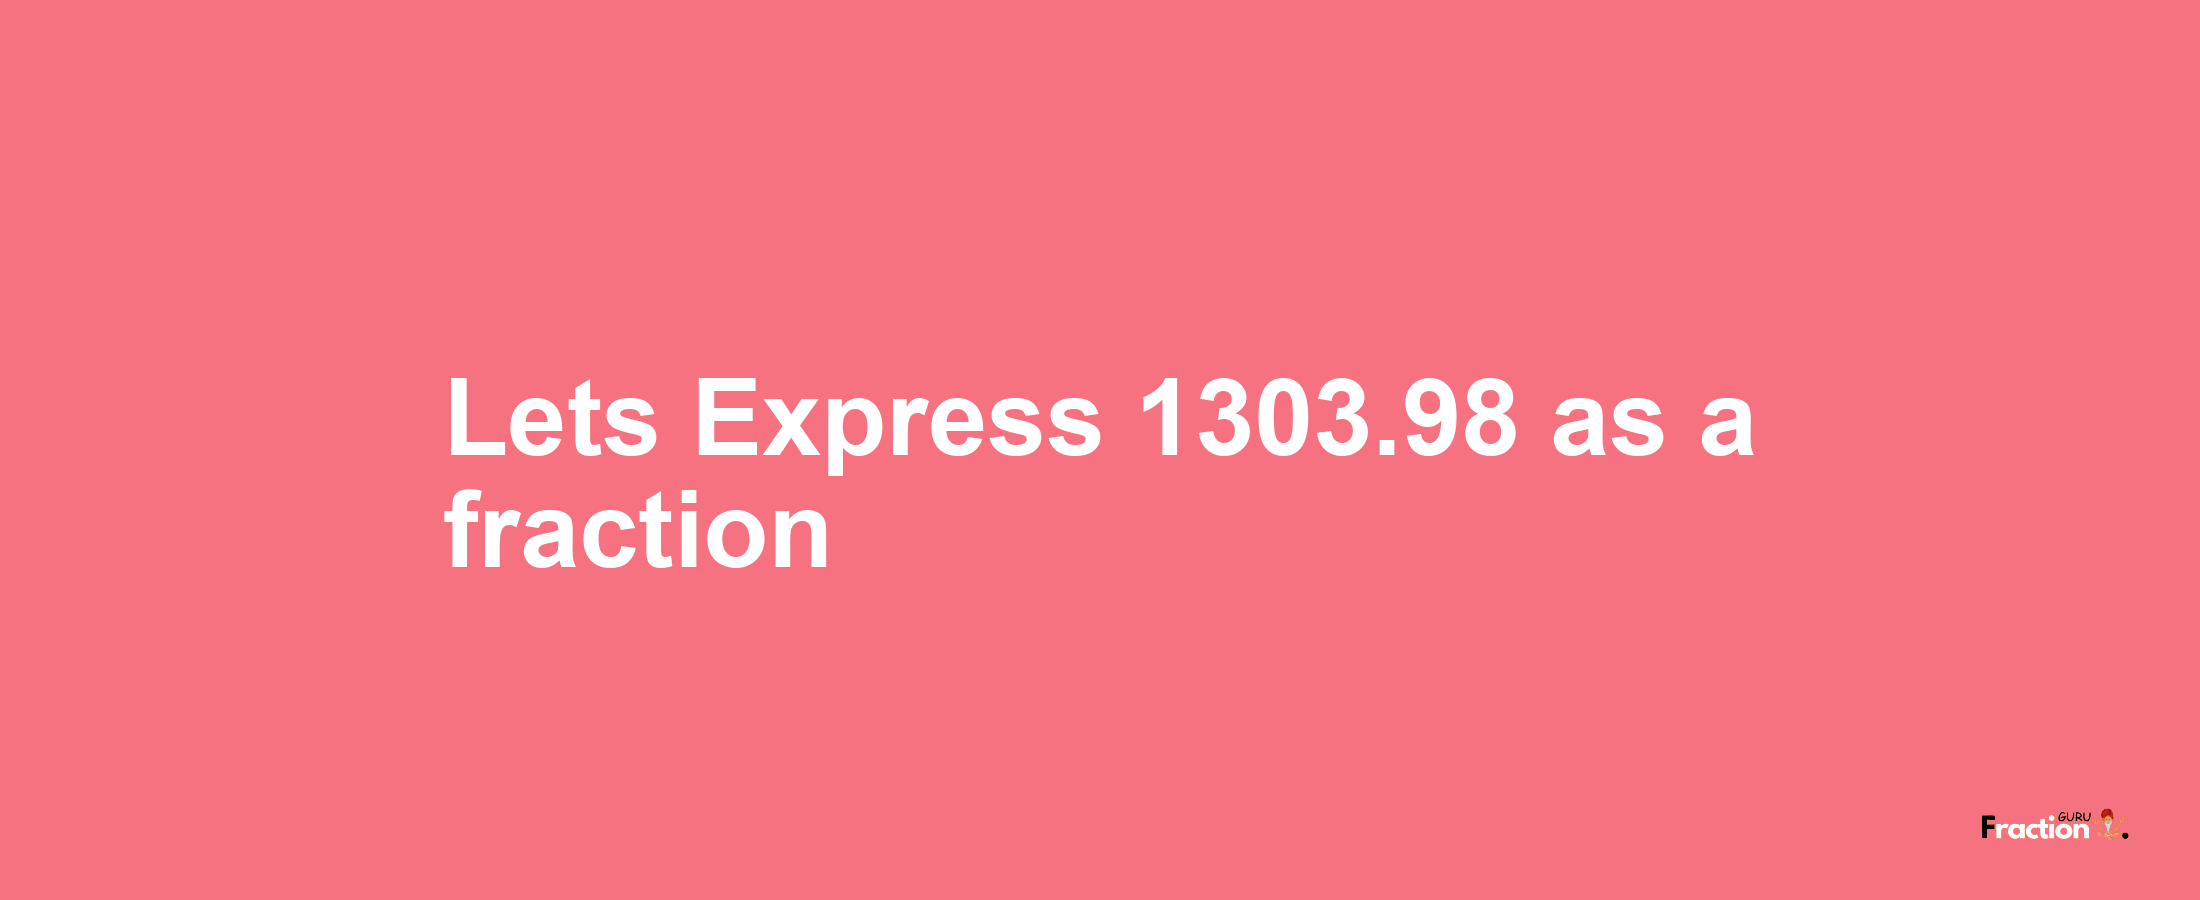 Lets Express 1303.98 as afraction